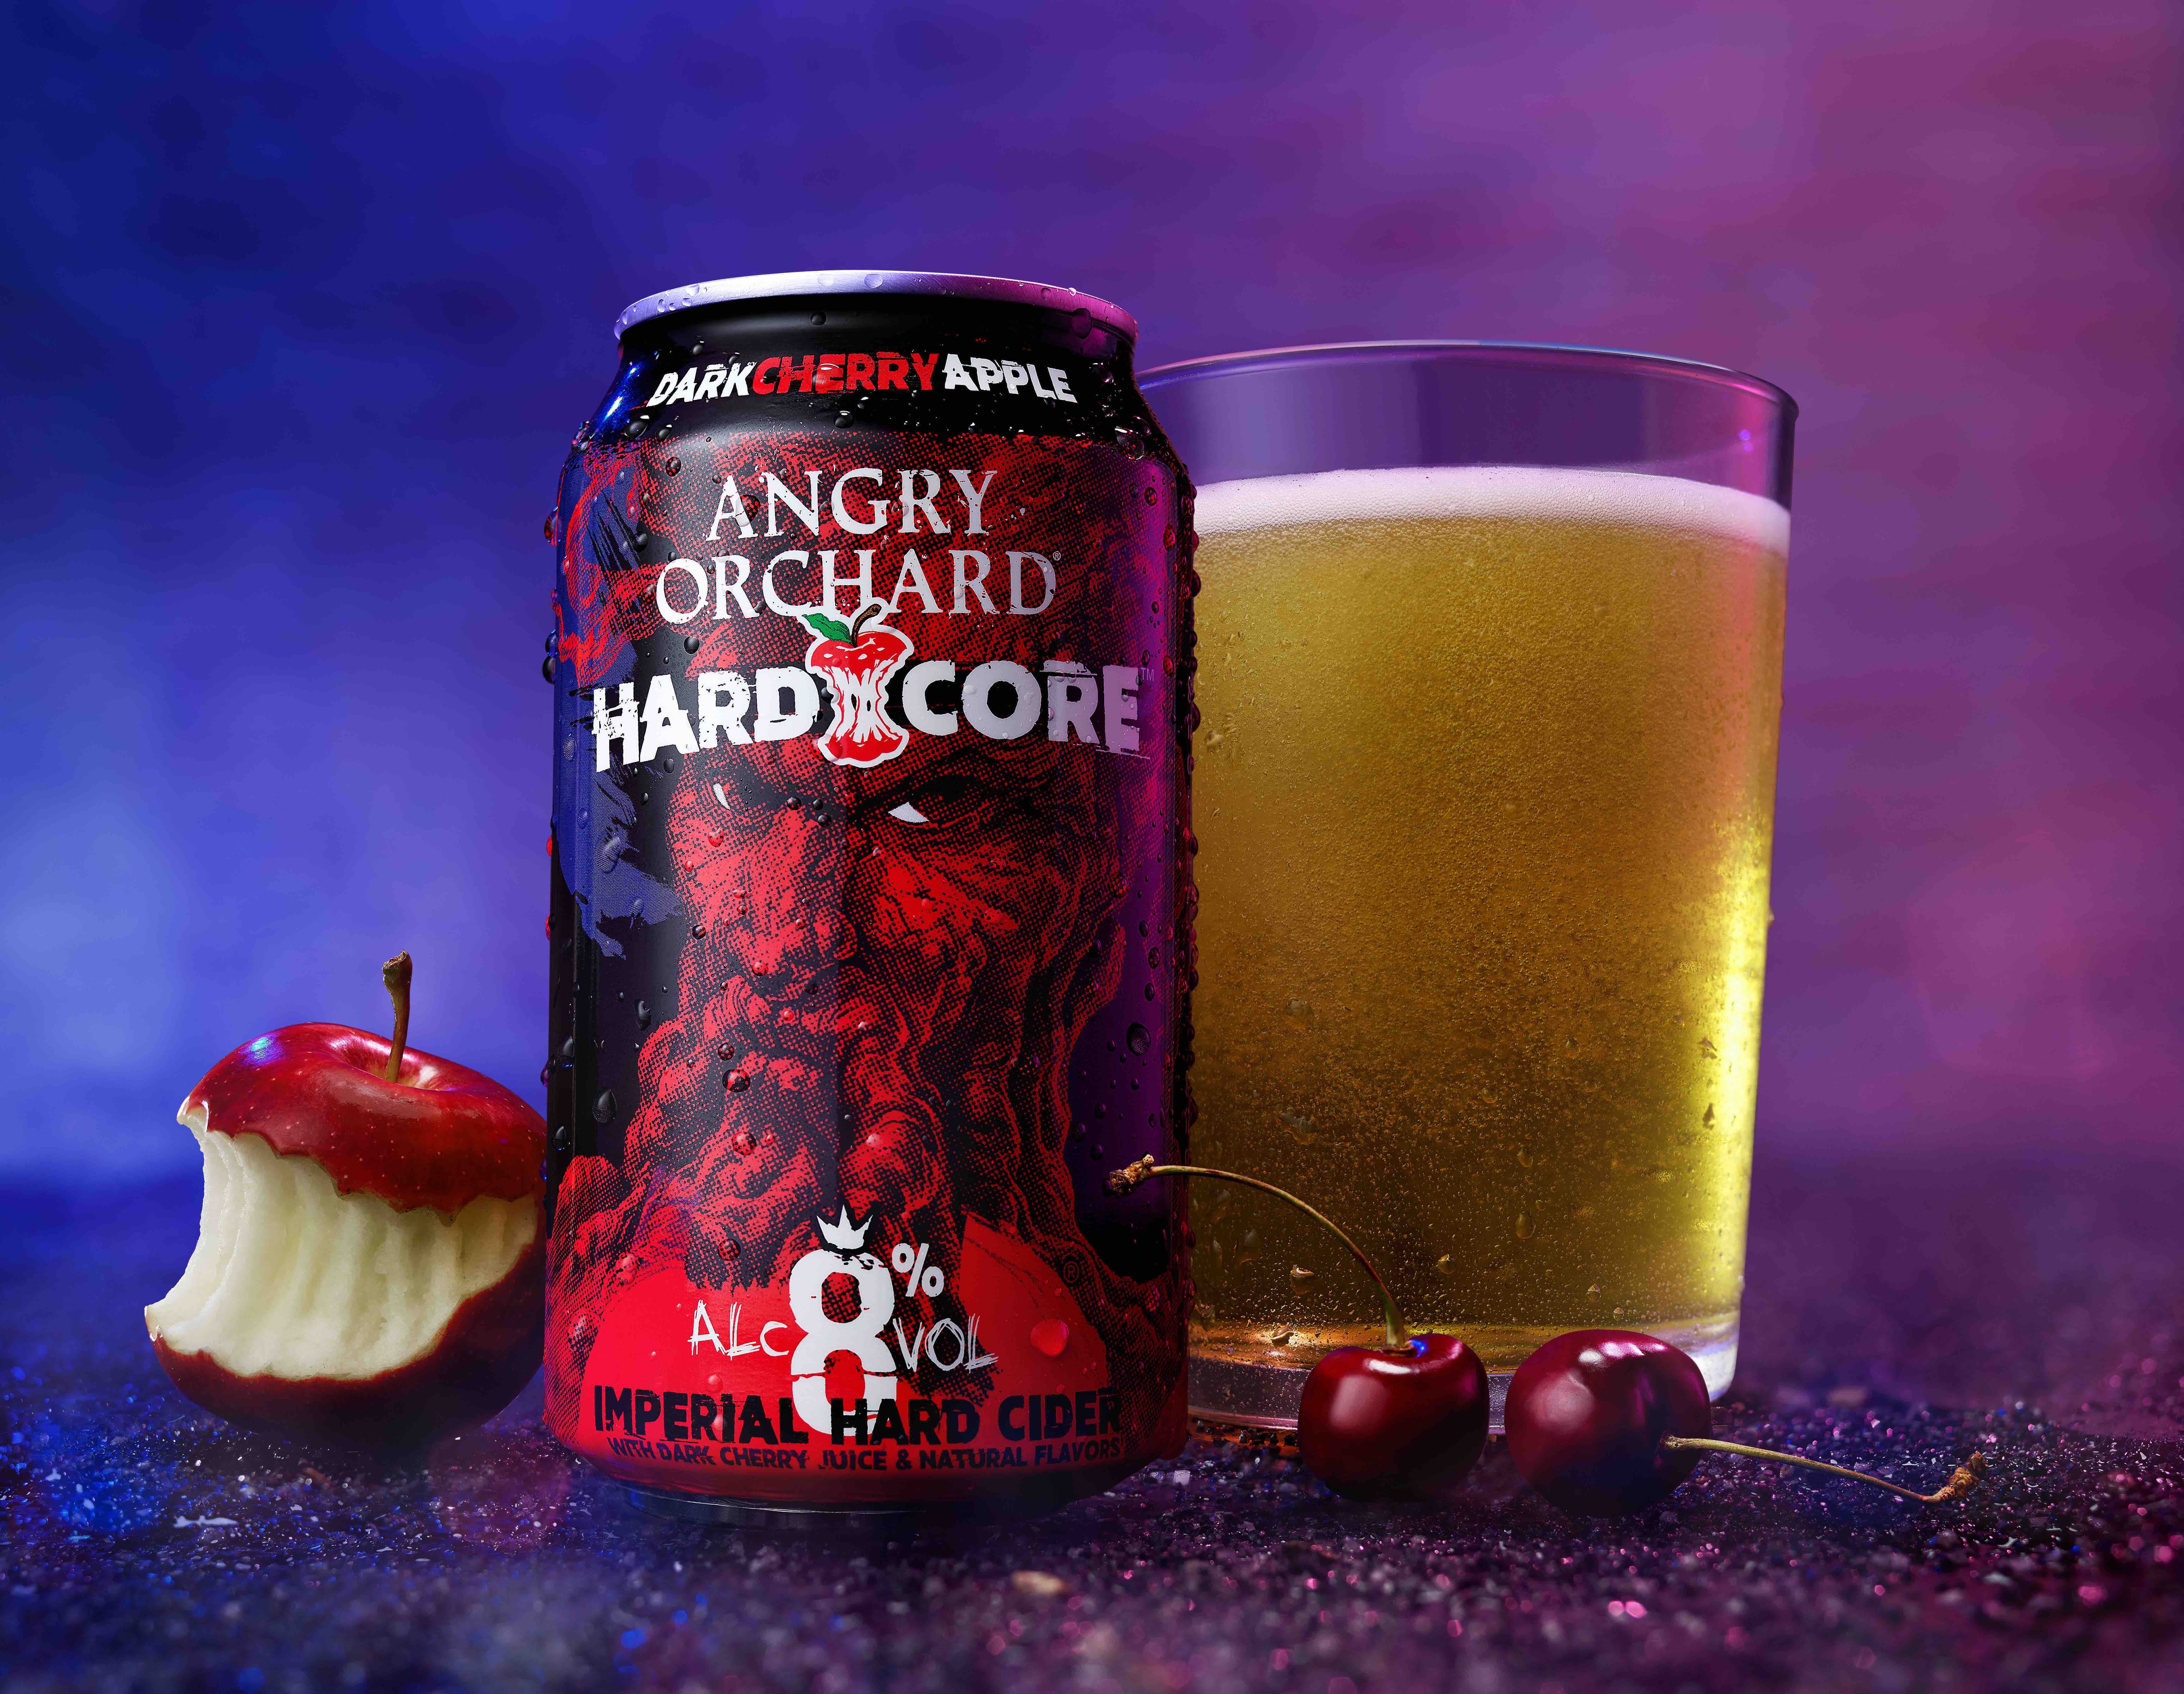 image of Angry Orchard Hardcore courtesy of Angry Orchard Hard Cider